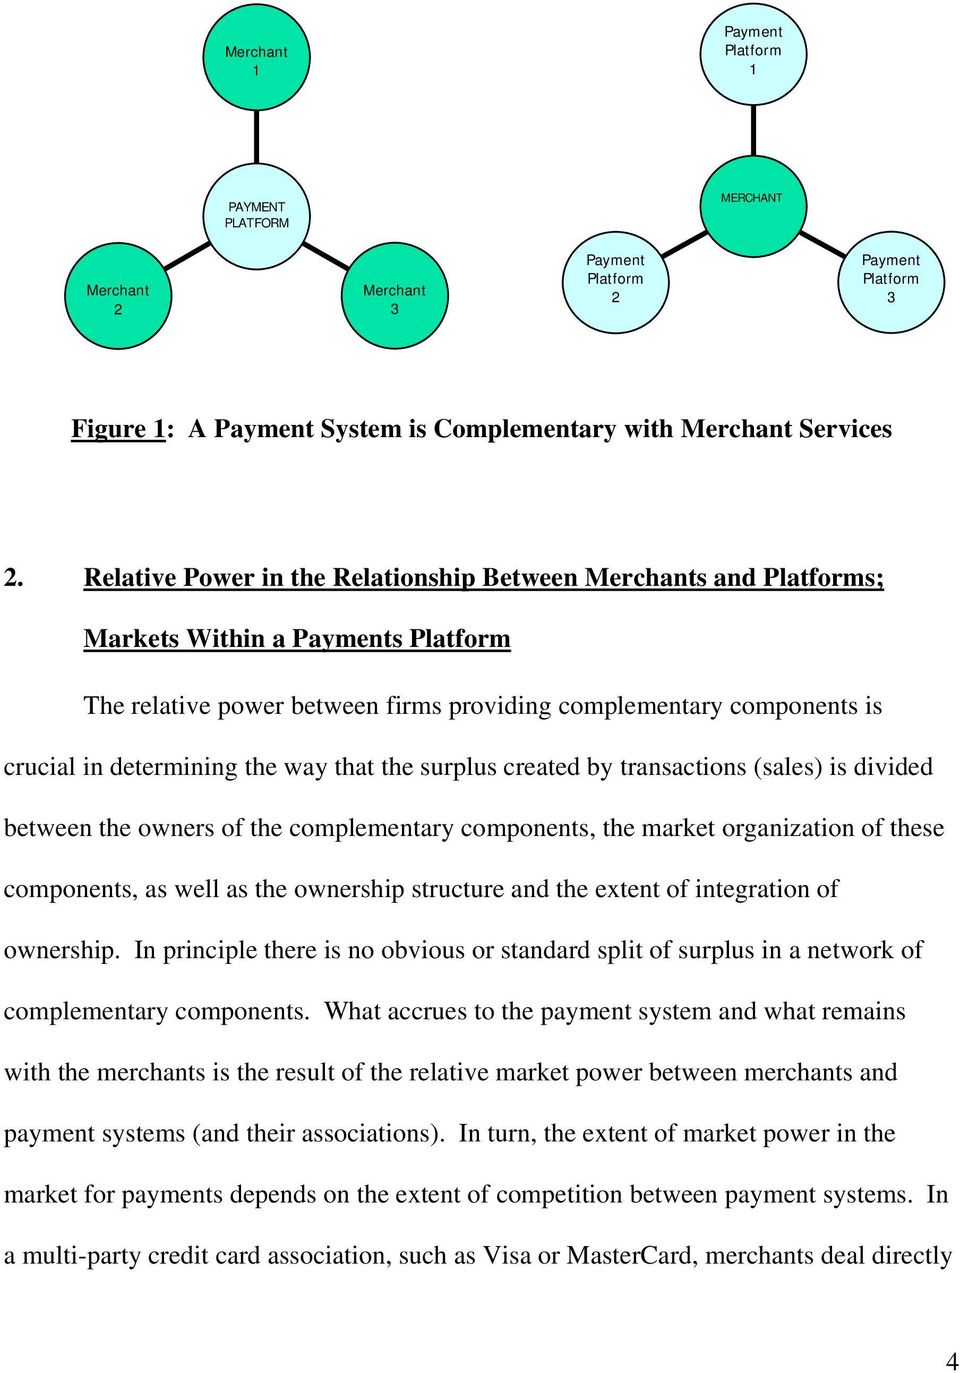 the way that the surplus created by transactions (sales) is divided between the owners of the complementary components, the market organization of these components, as well as the ownership structure